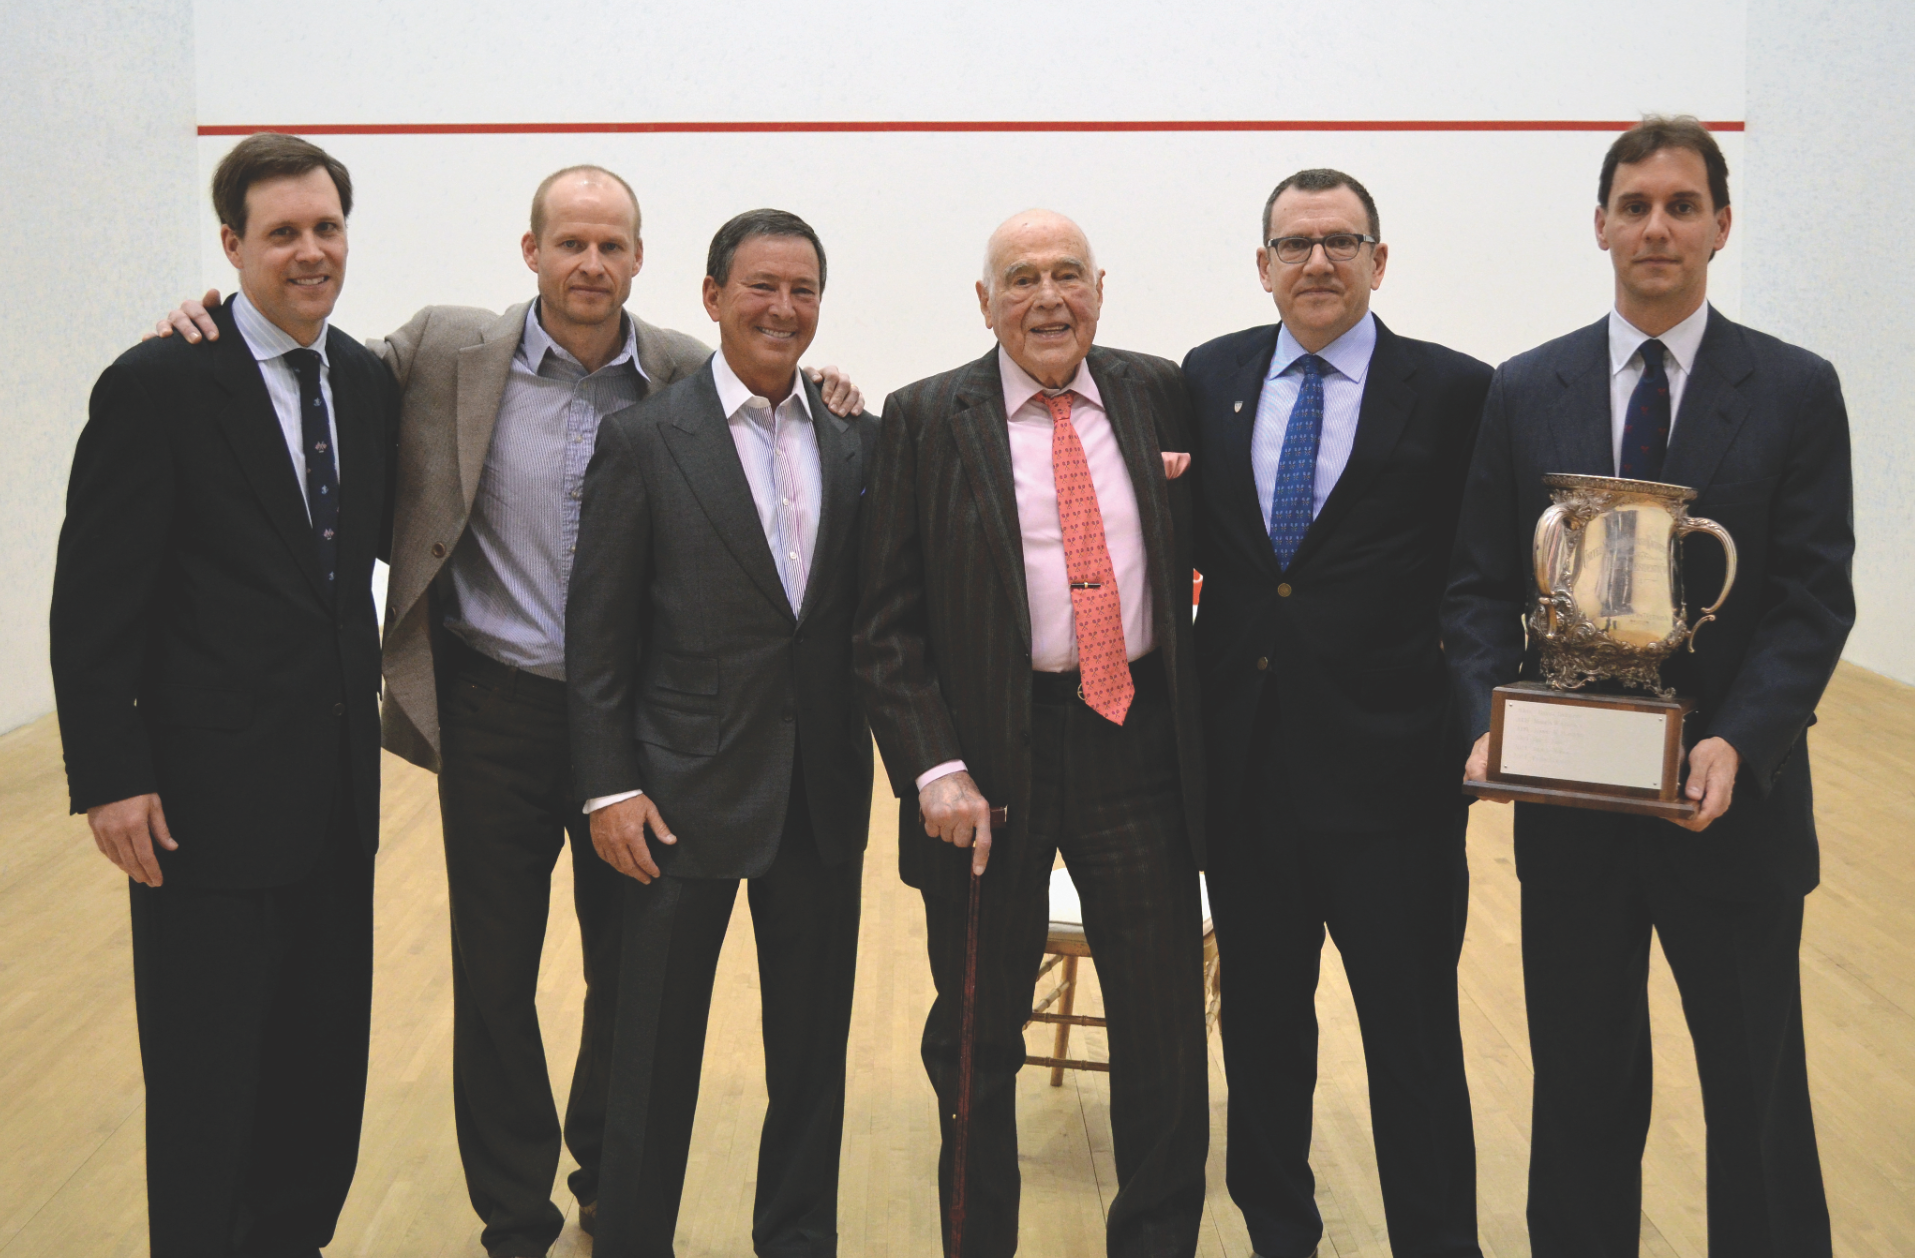 In April 2013, Victor Elmaleh became the oldest winner of the President's Cup when he received the award at the World Doubles: (L-R) James Zug, Gary Waite, Niko Elmaleh, Victor Elmaleh, Peter Lasusa and Morris Clothier. 